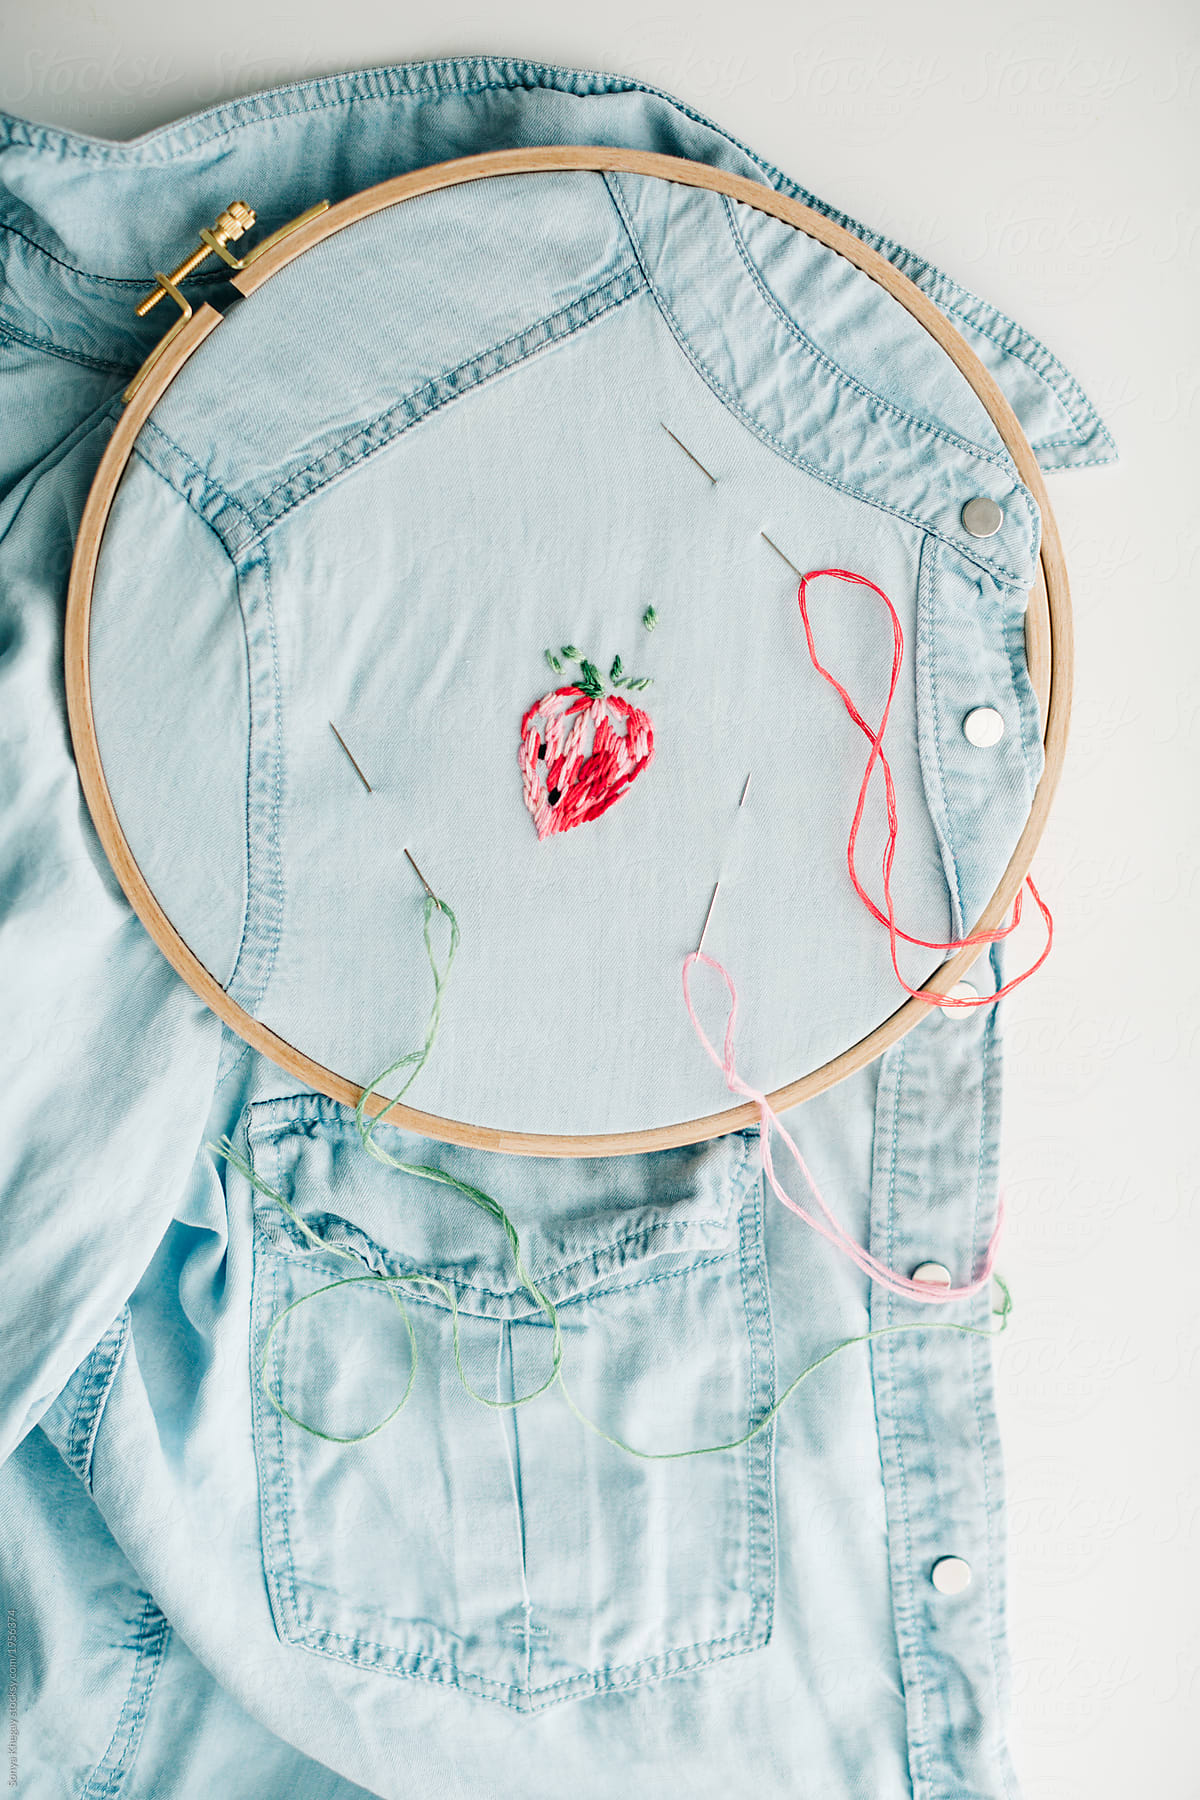 embroidery in progress